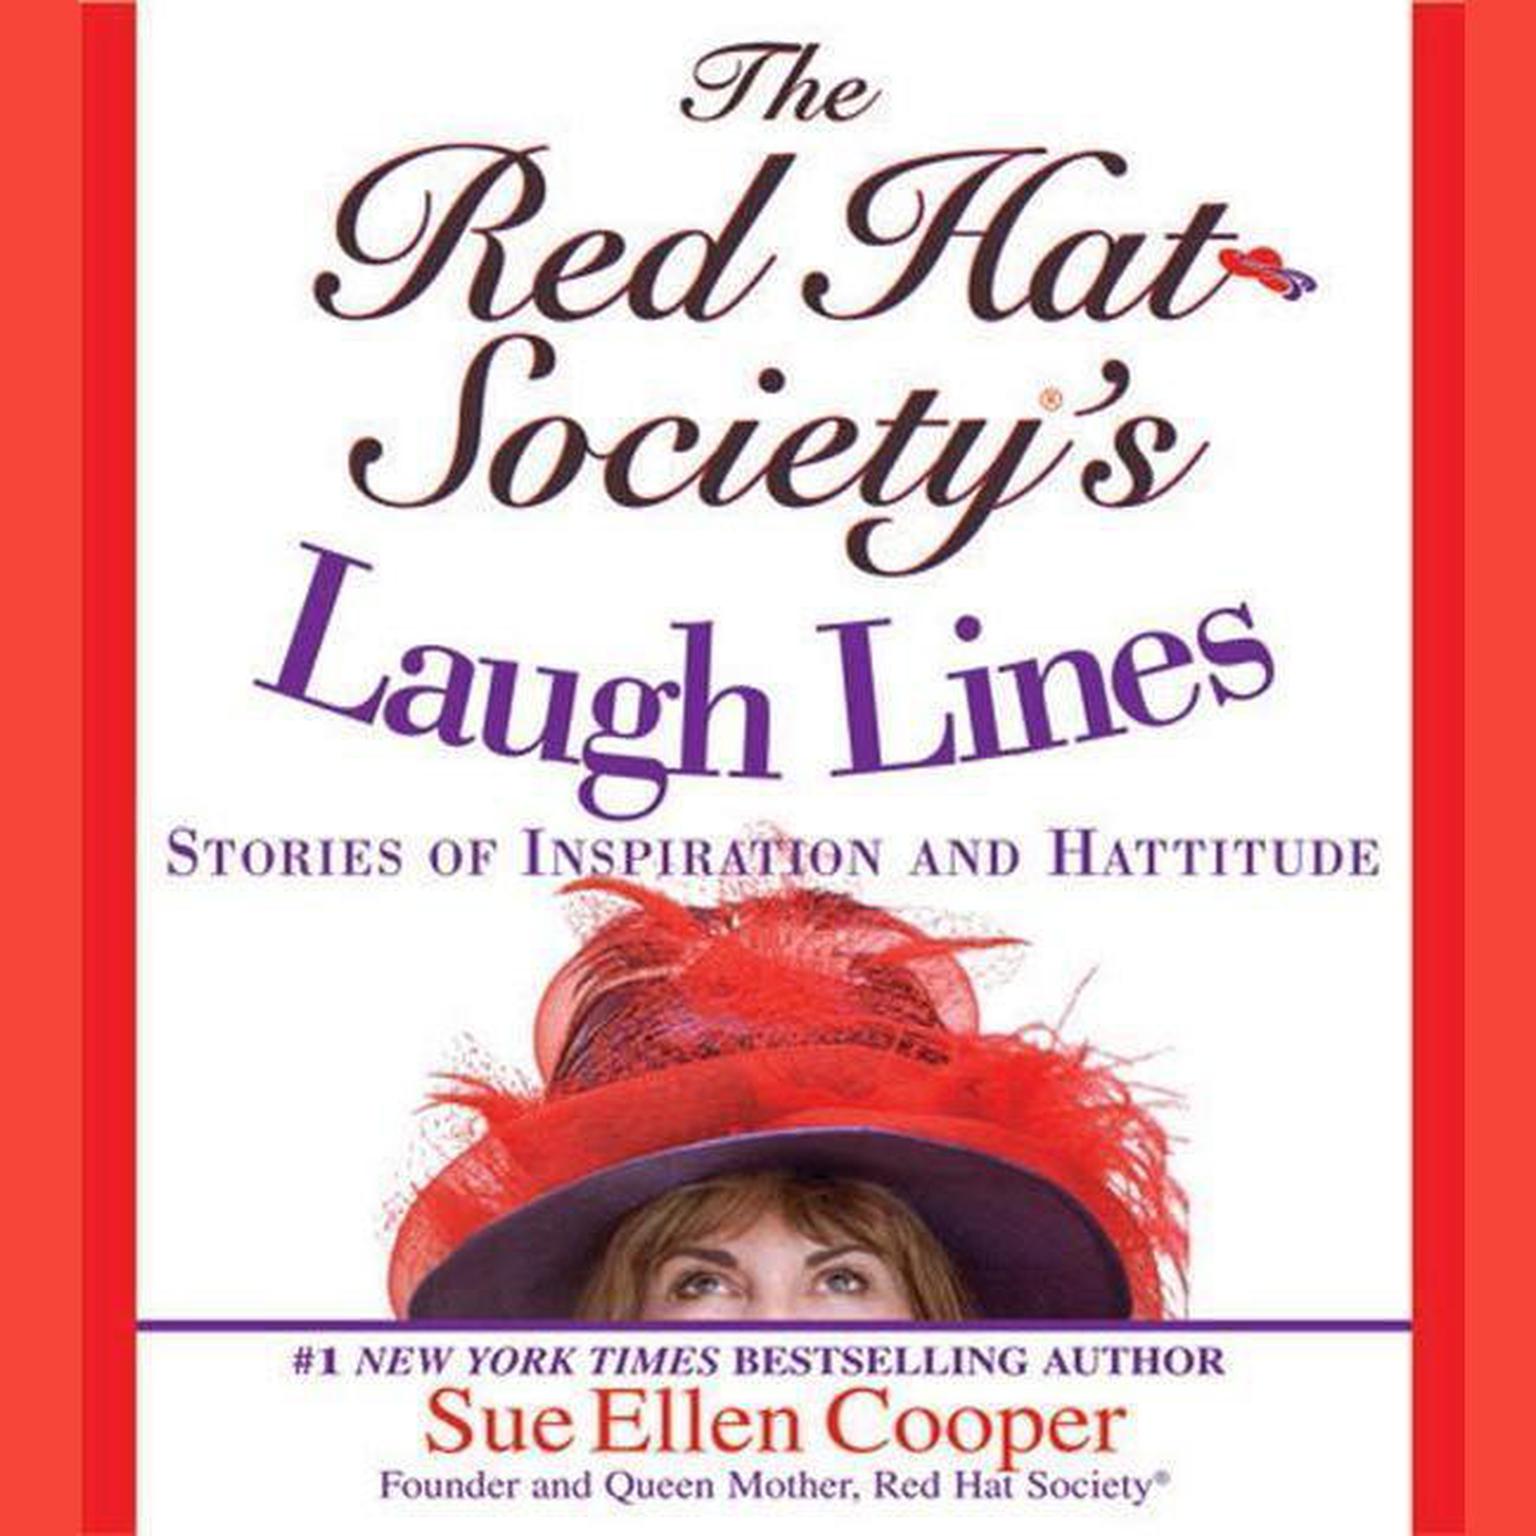 The Red Hat Societys Laugh Lines (Abridged): Stories of Inspiration and Hattitude Audiobook, by Sue Ellen Cooper